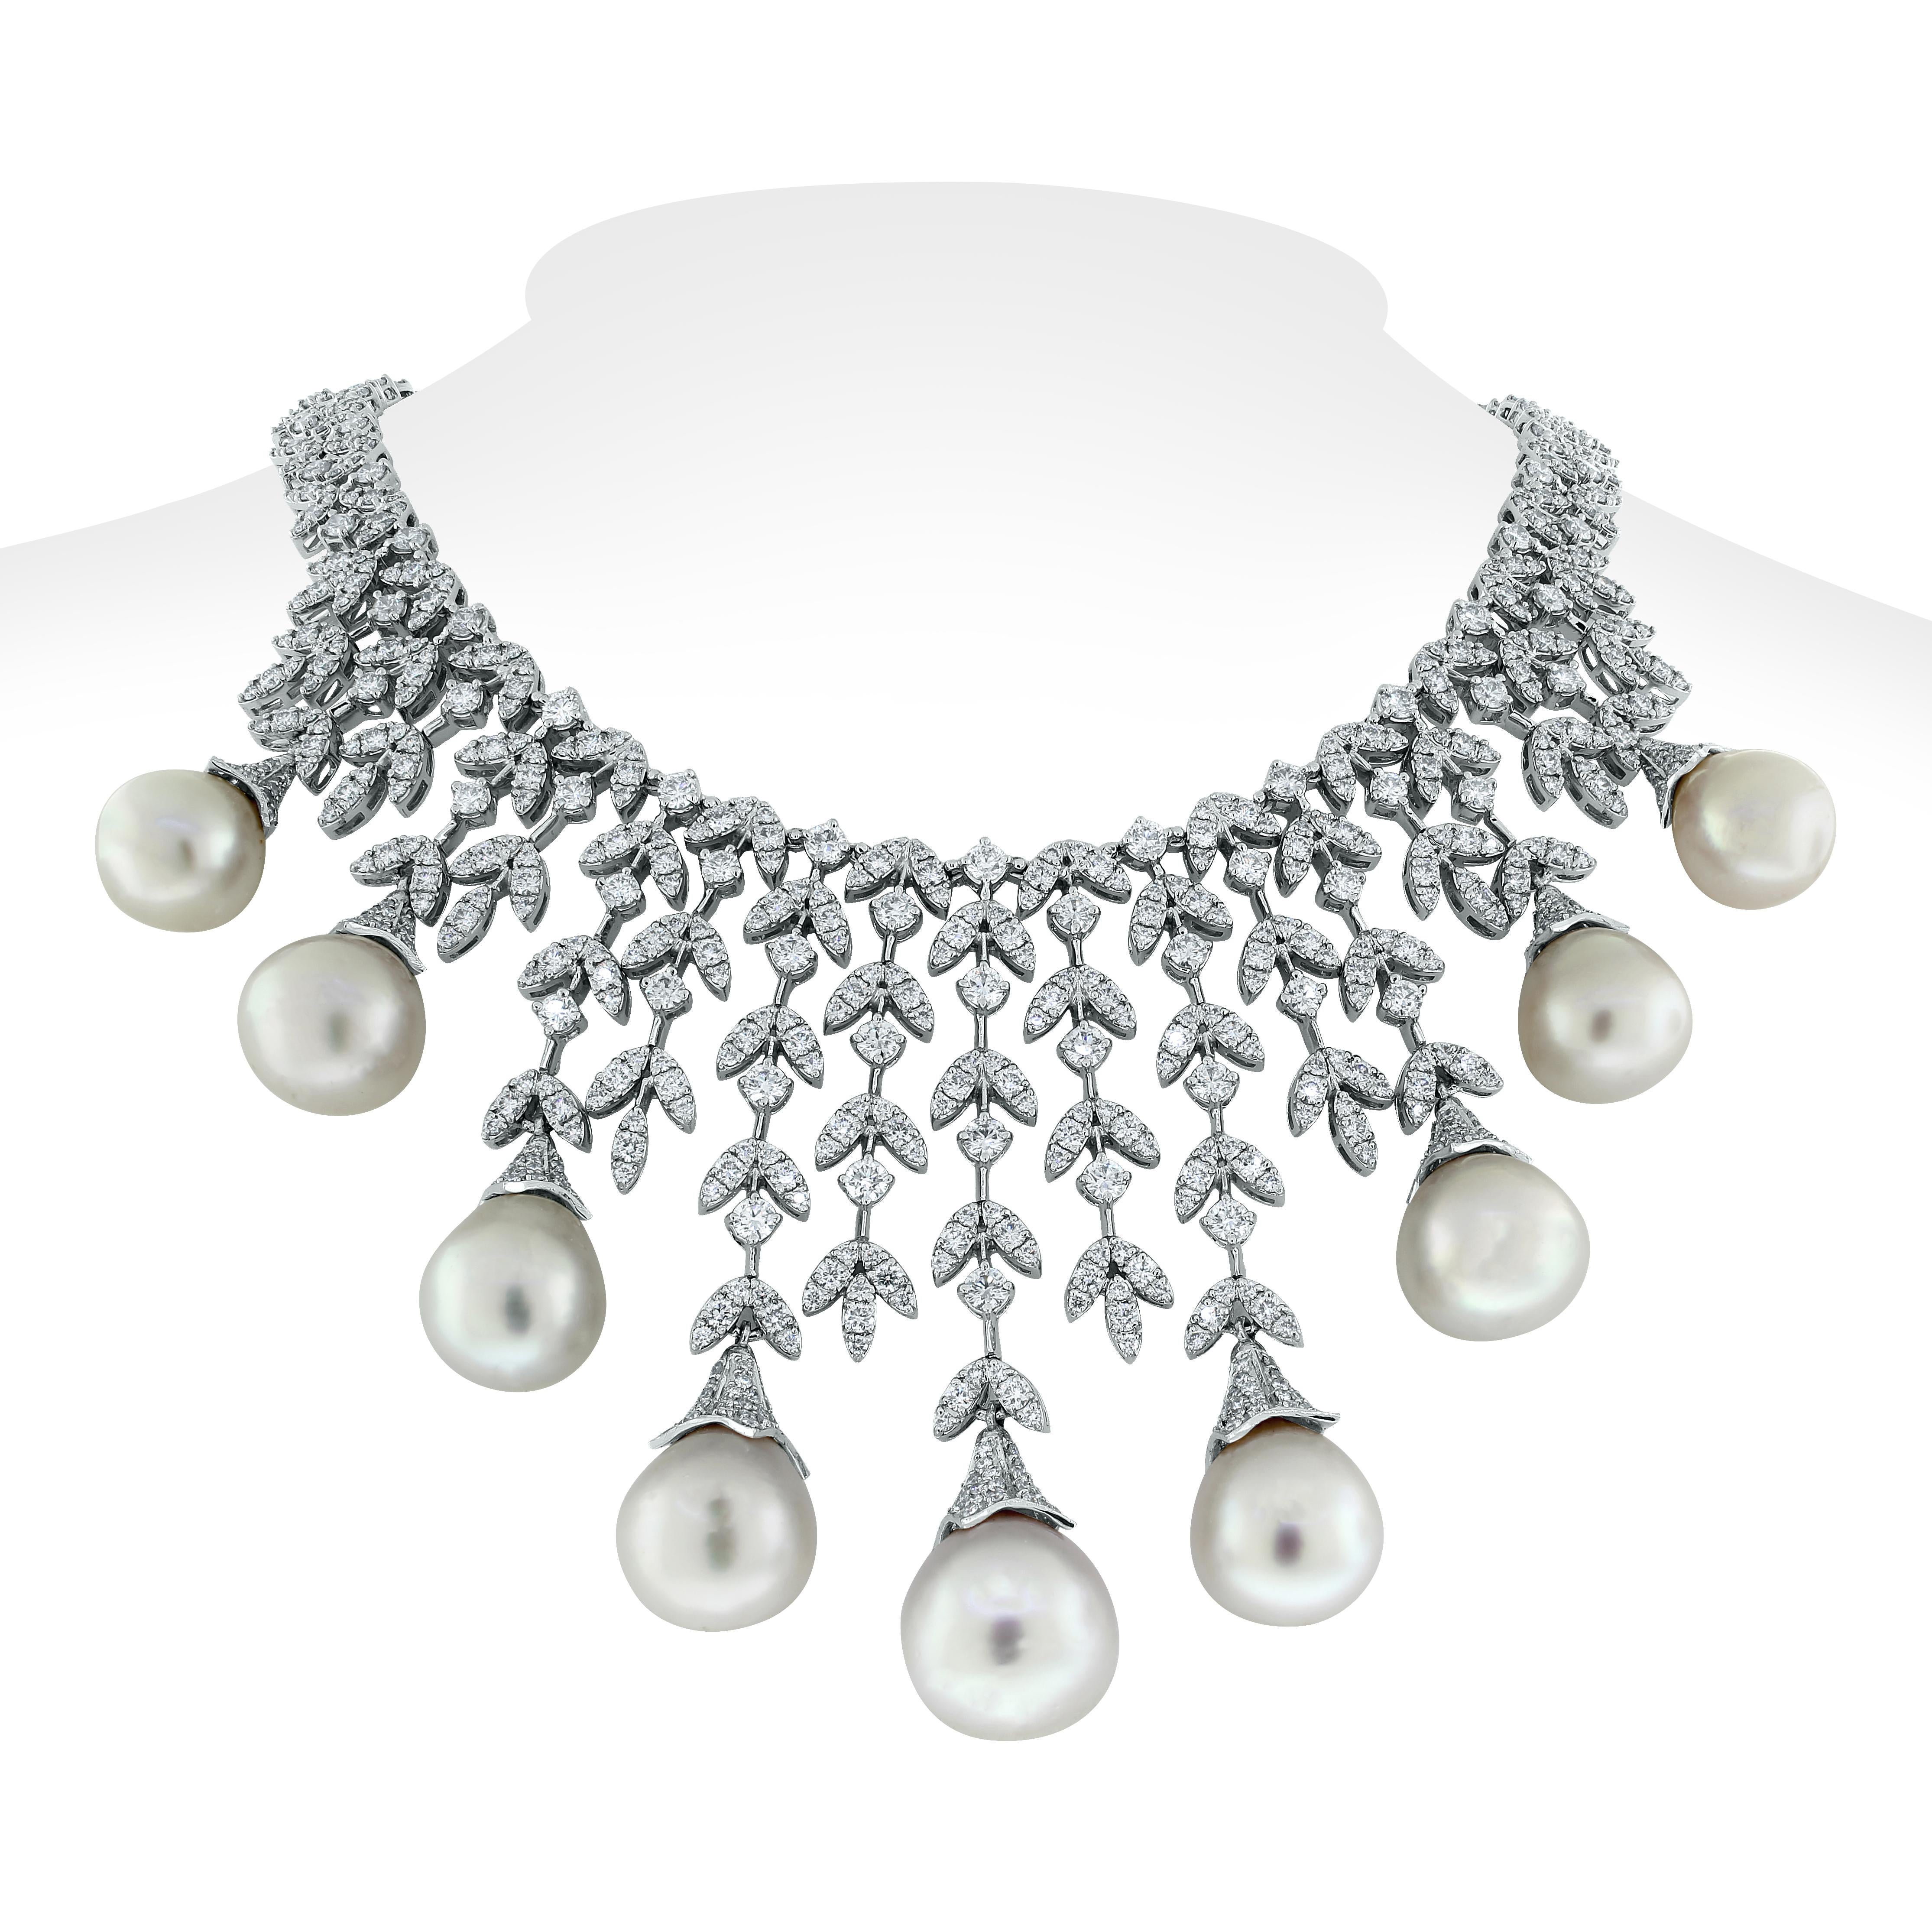 Beauvince Diamond and South Sea Pearls Necklace and Earrings Suite in White Gold For Sale 3